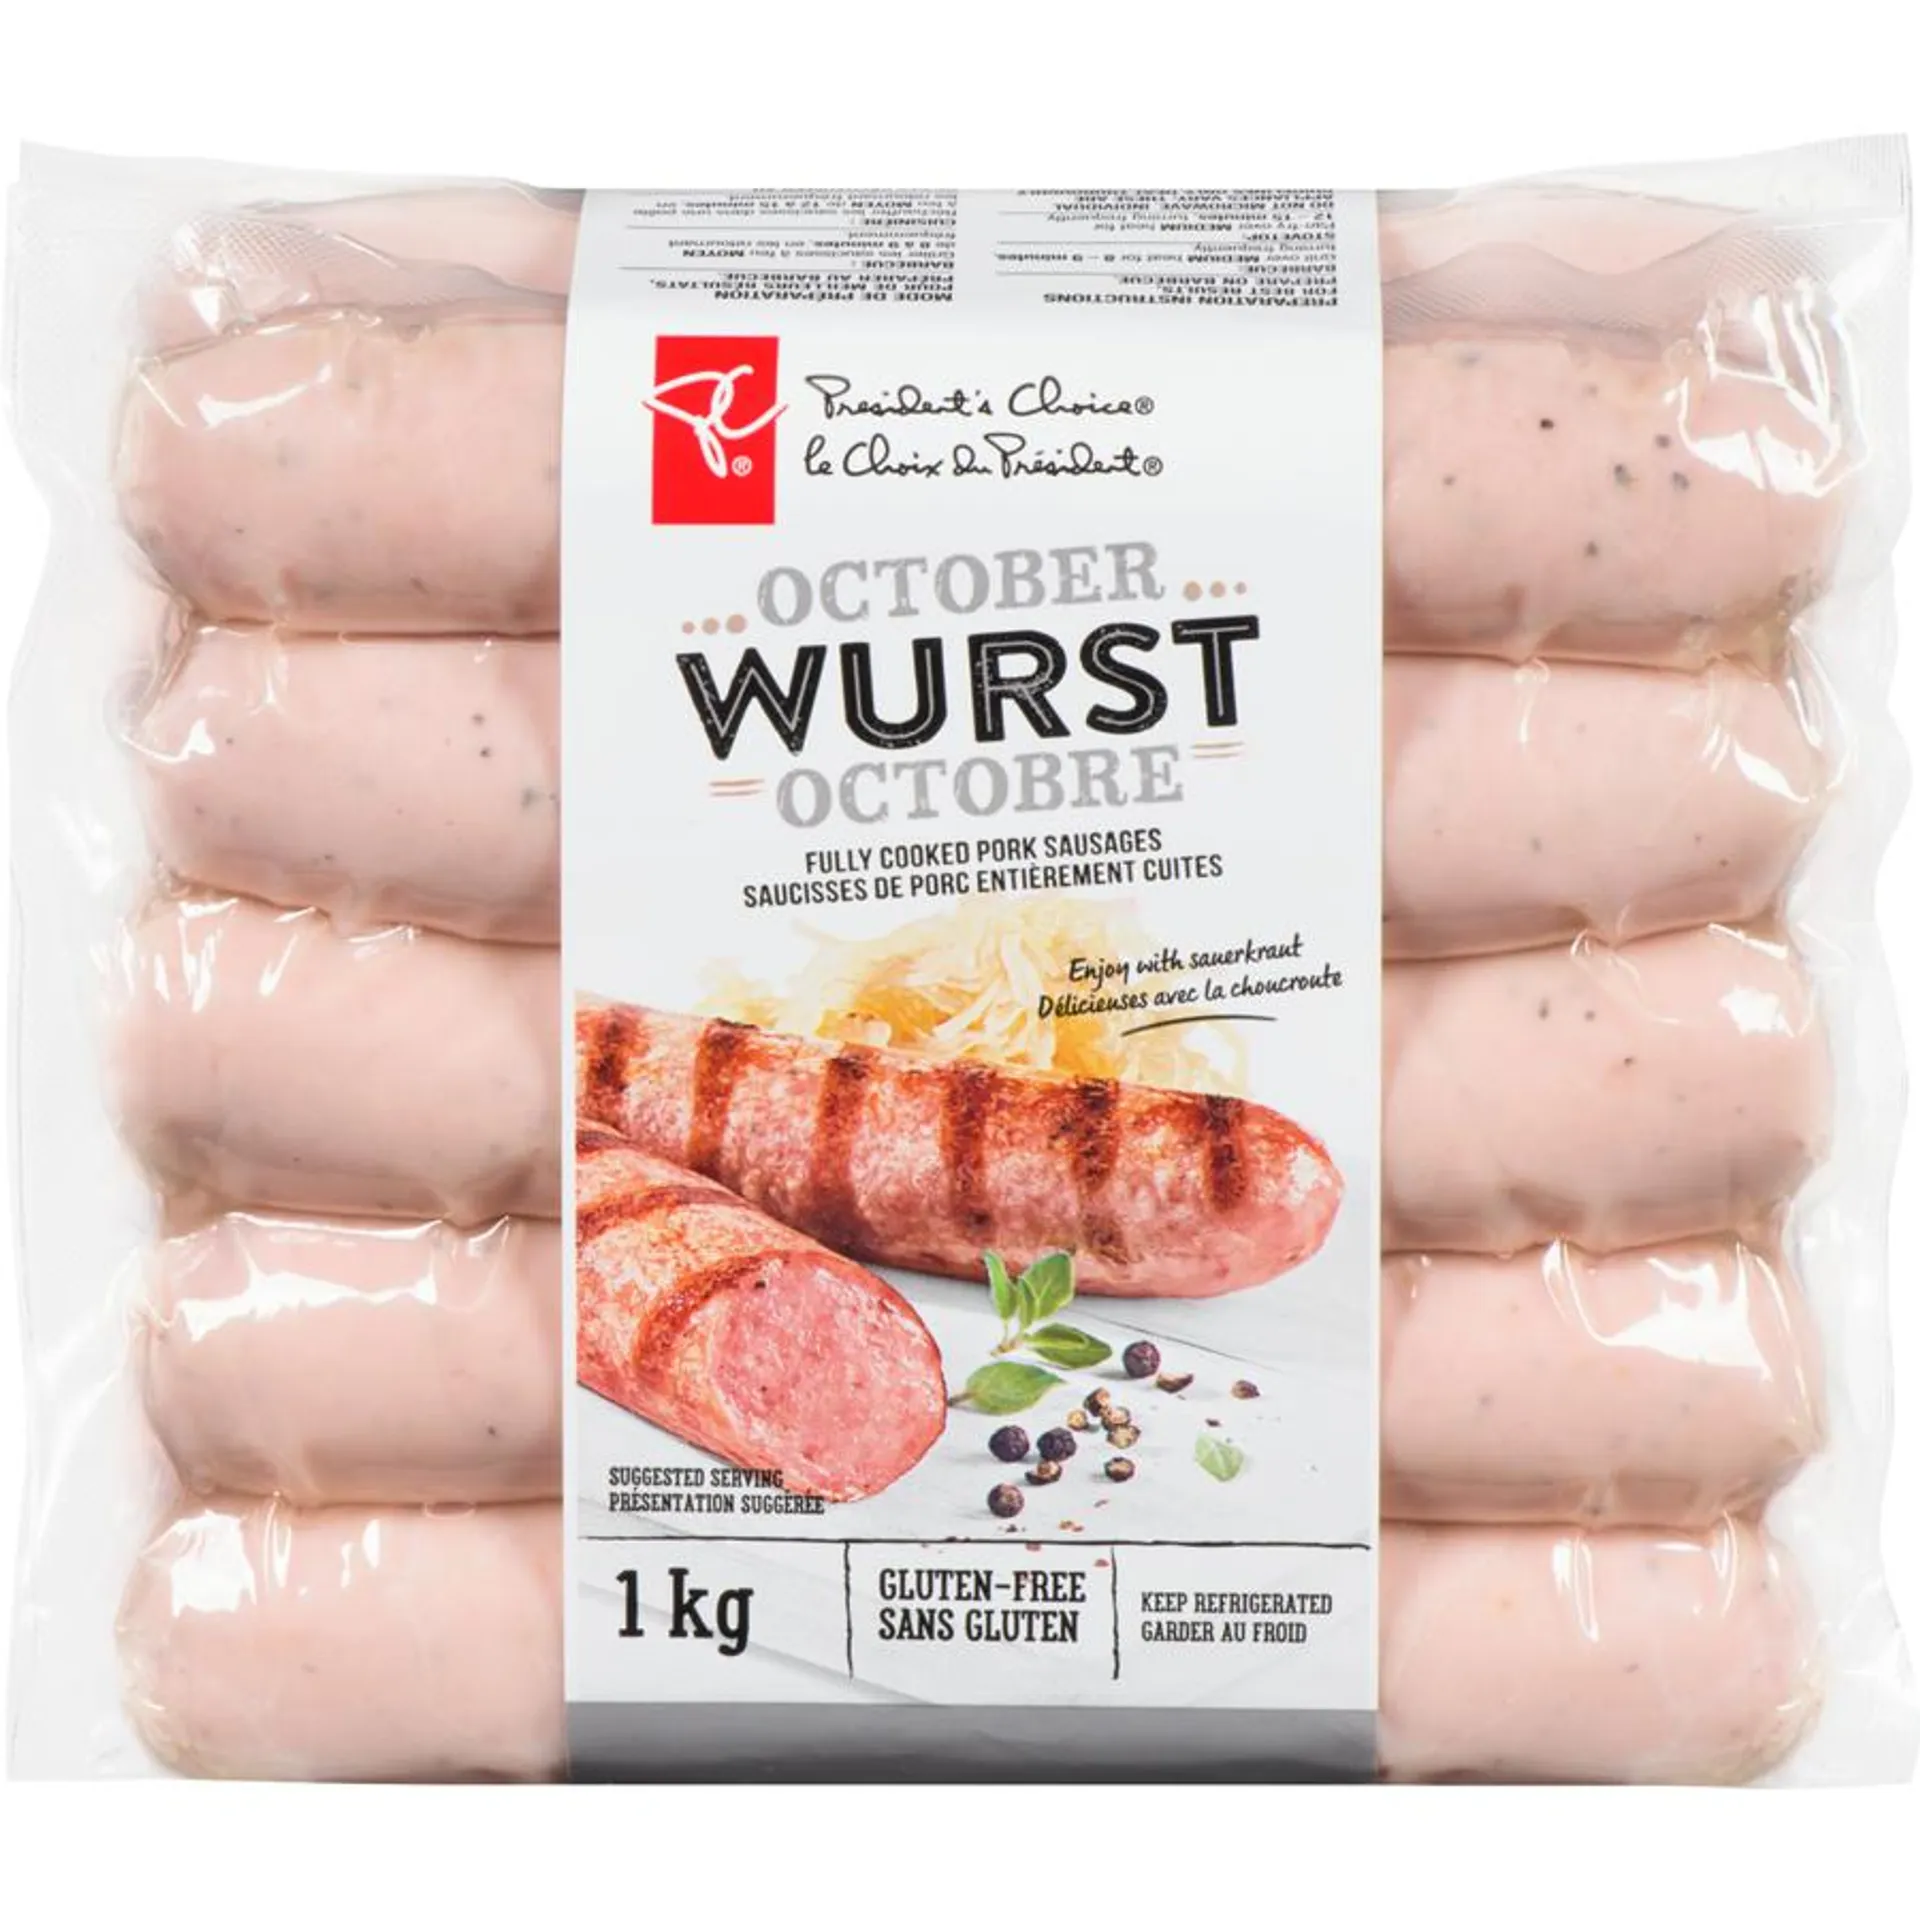 October Wurst Fully Cooked Pork Sausages